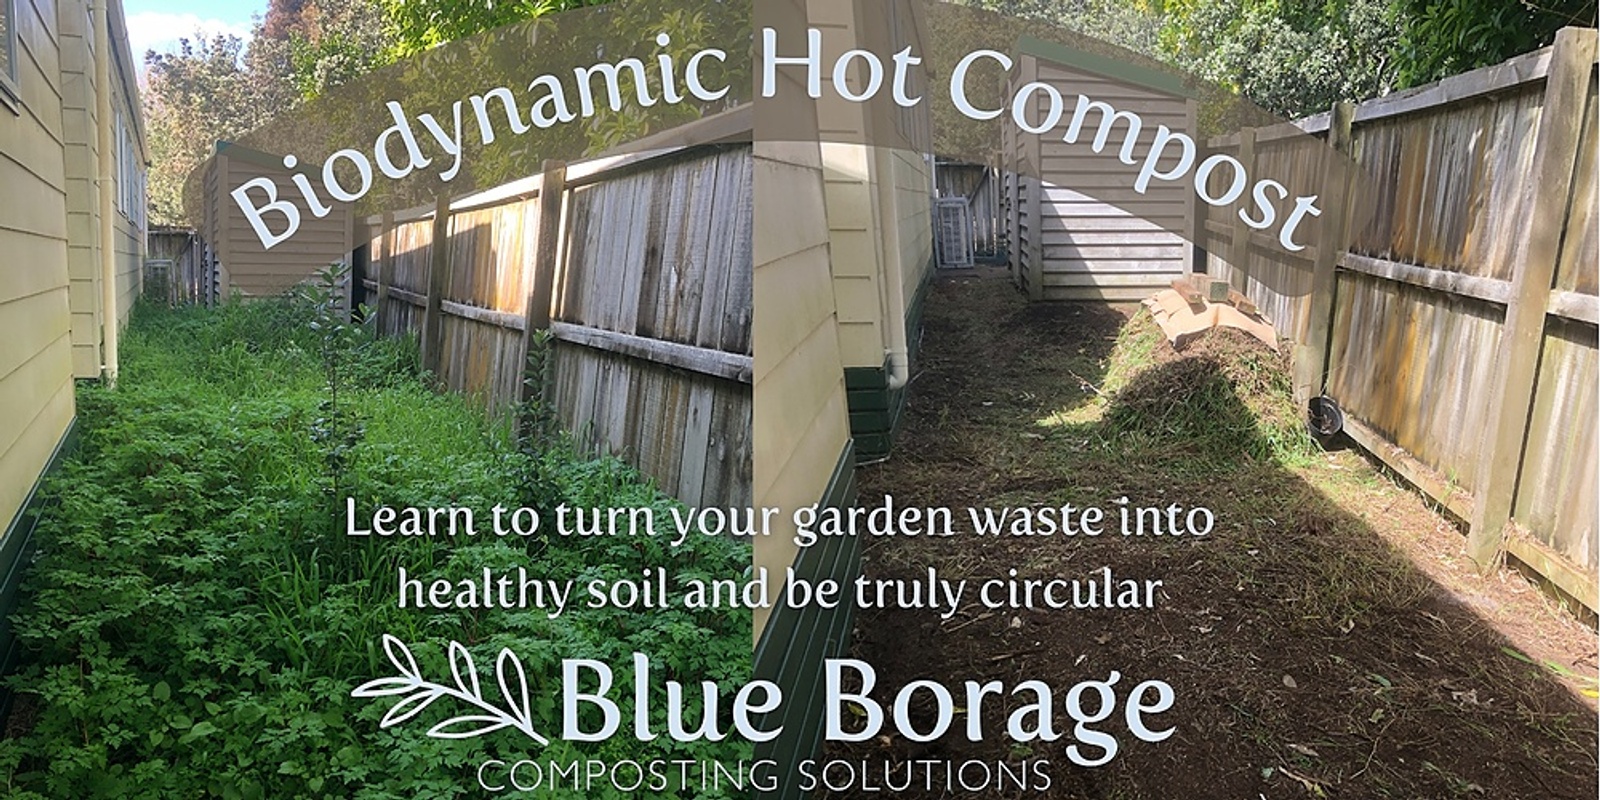 Banner image for EcoFest Biodynamic Hot Compost build at the Auckland Women's Centre